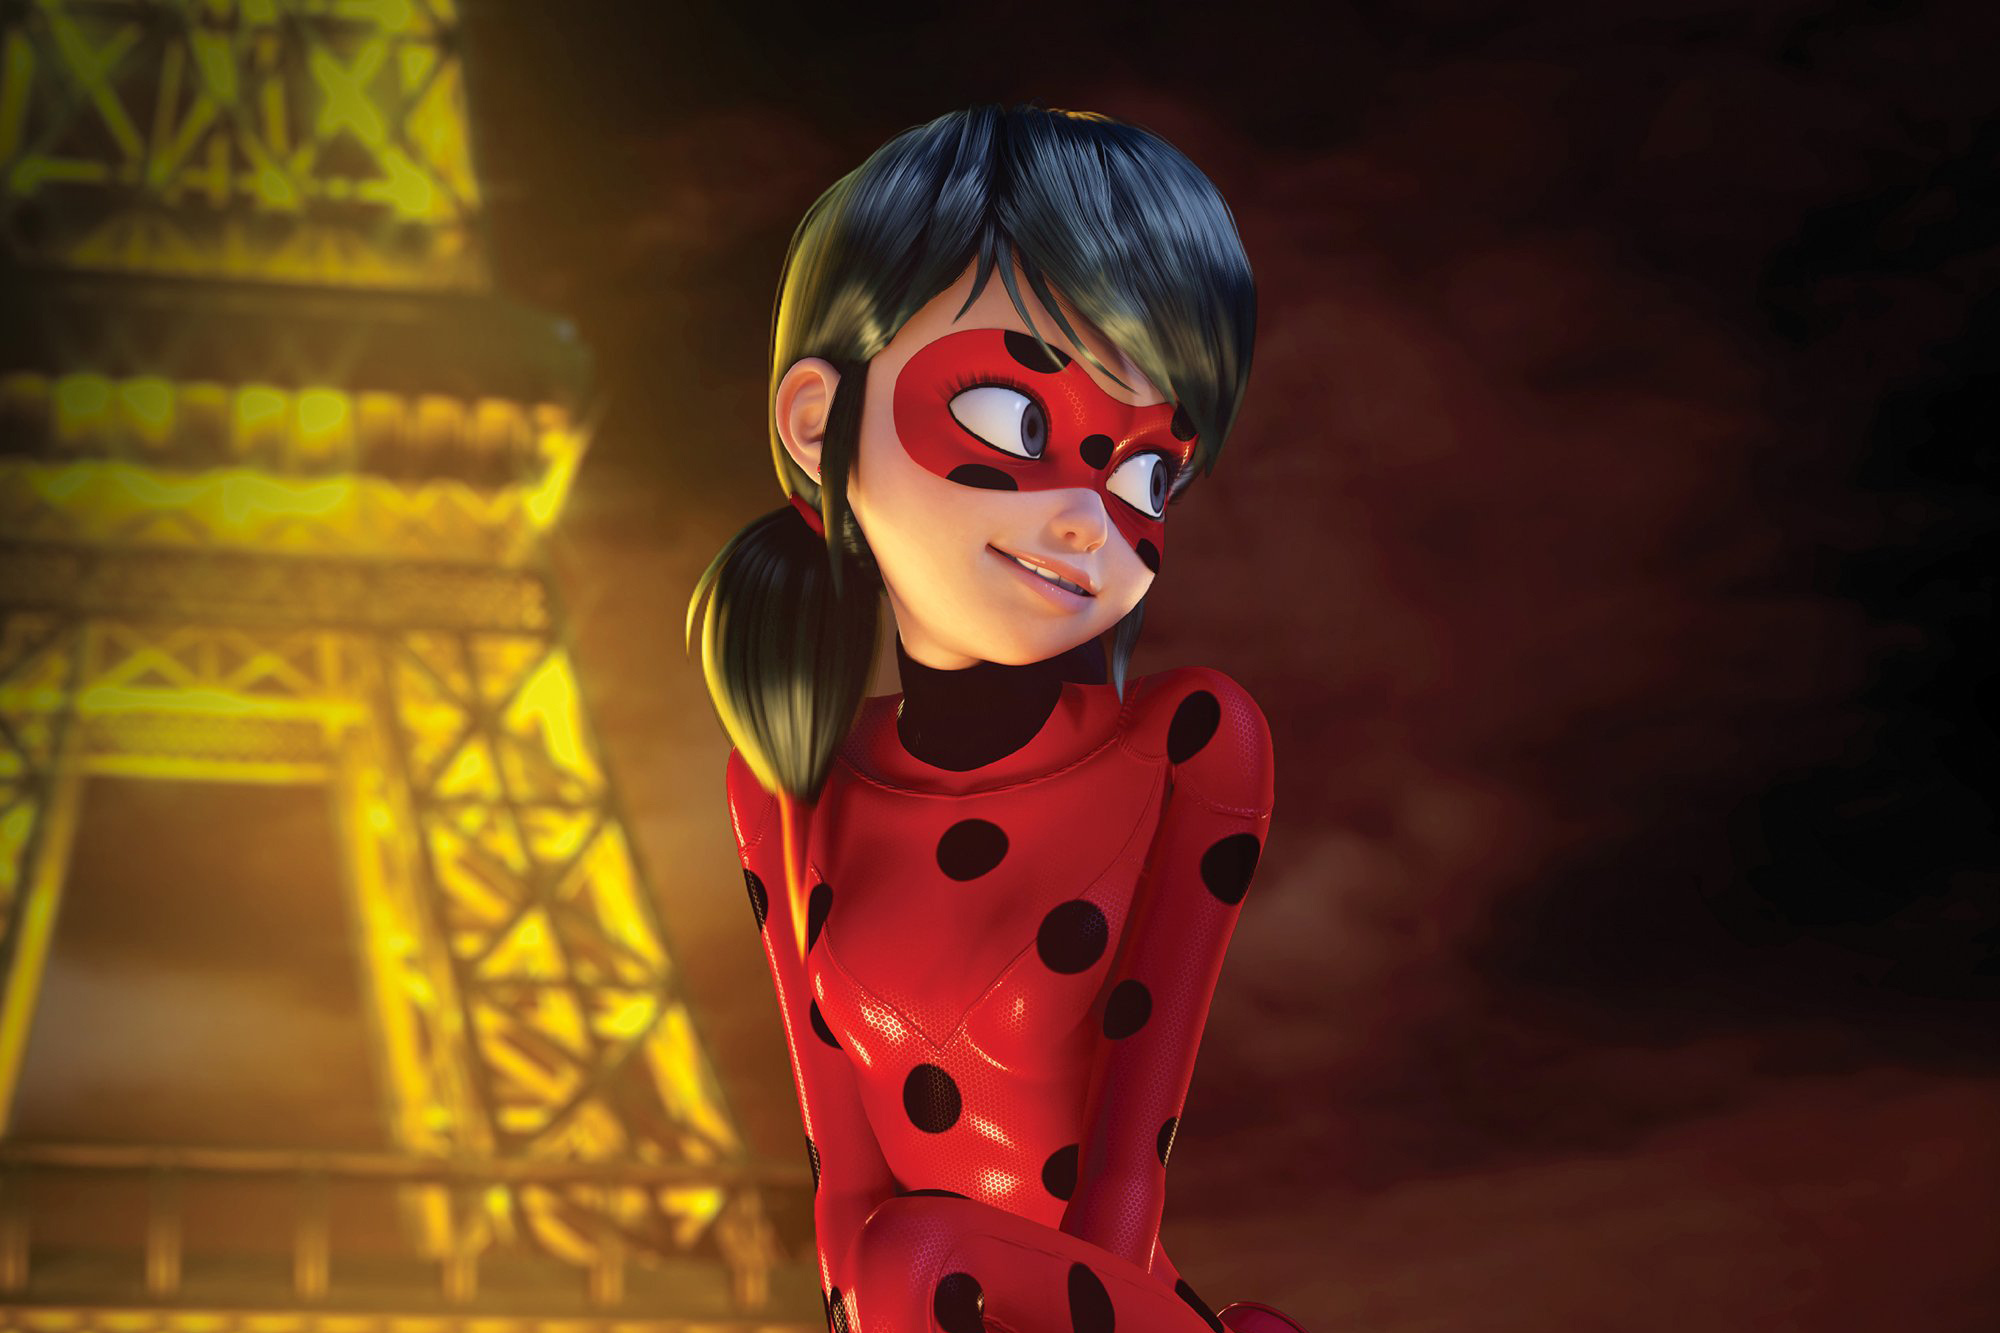 Miraculous HD movies, Wallpapers and images, Stunning backgrounds, Cinematic greatness, 2000x1340 HD Desktop